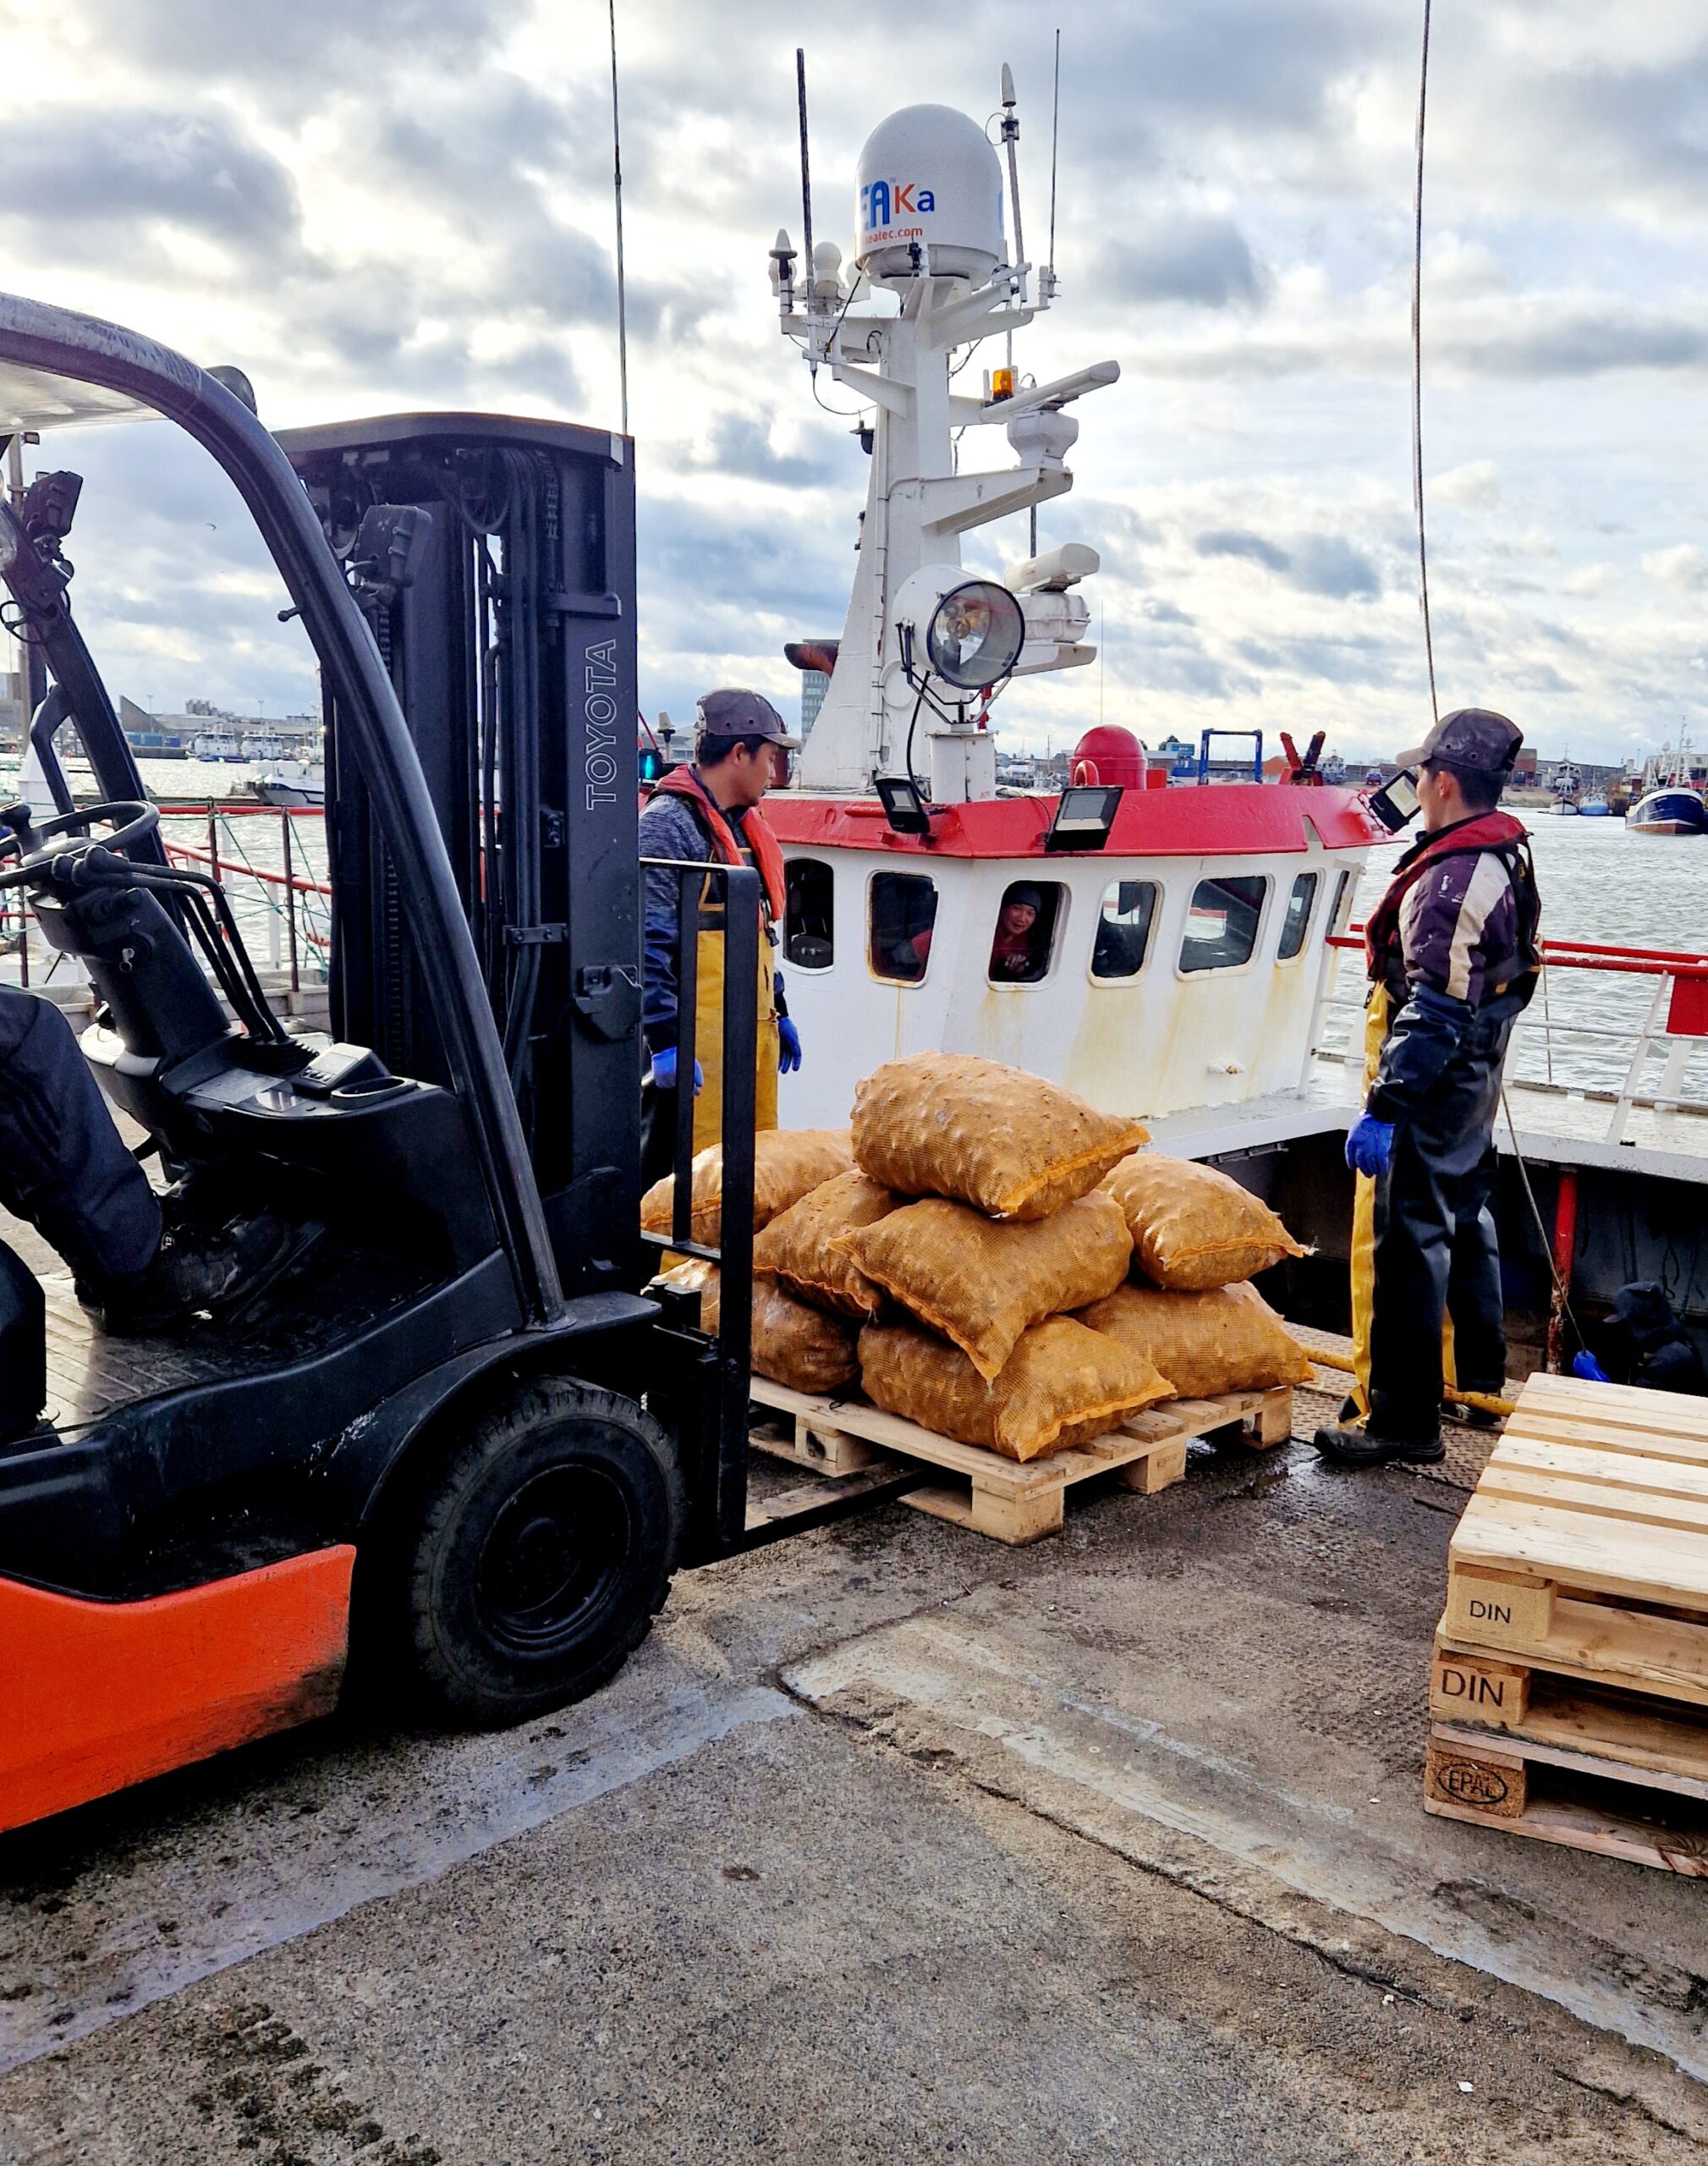 Bags of whelk on a pallet ready to be fork-lifted to storage or delivery vehicle